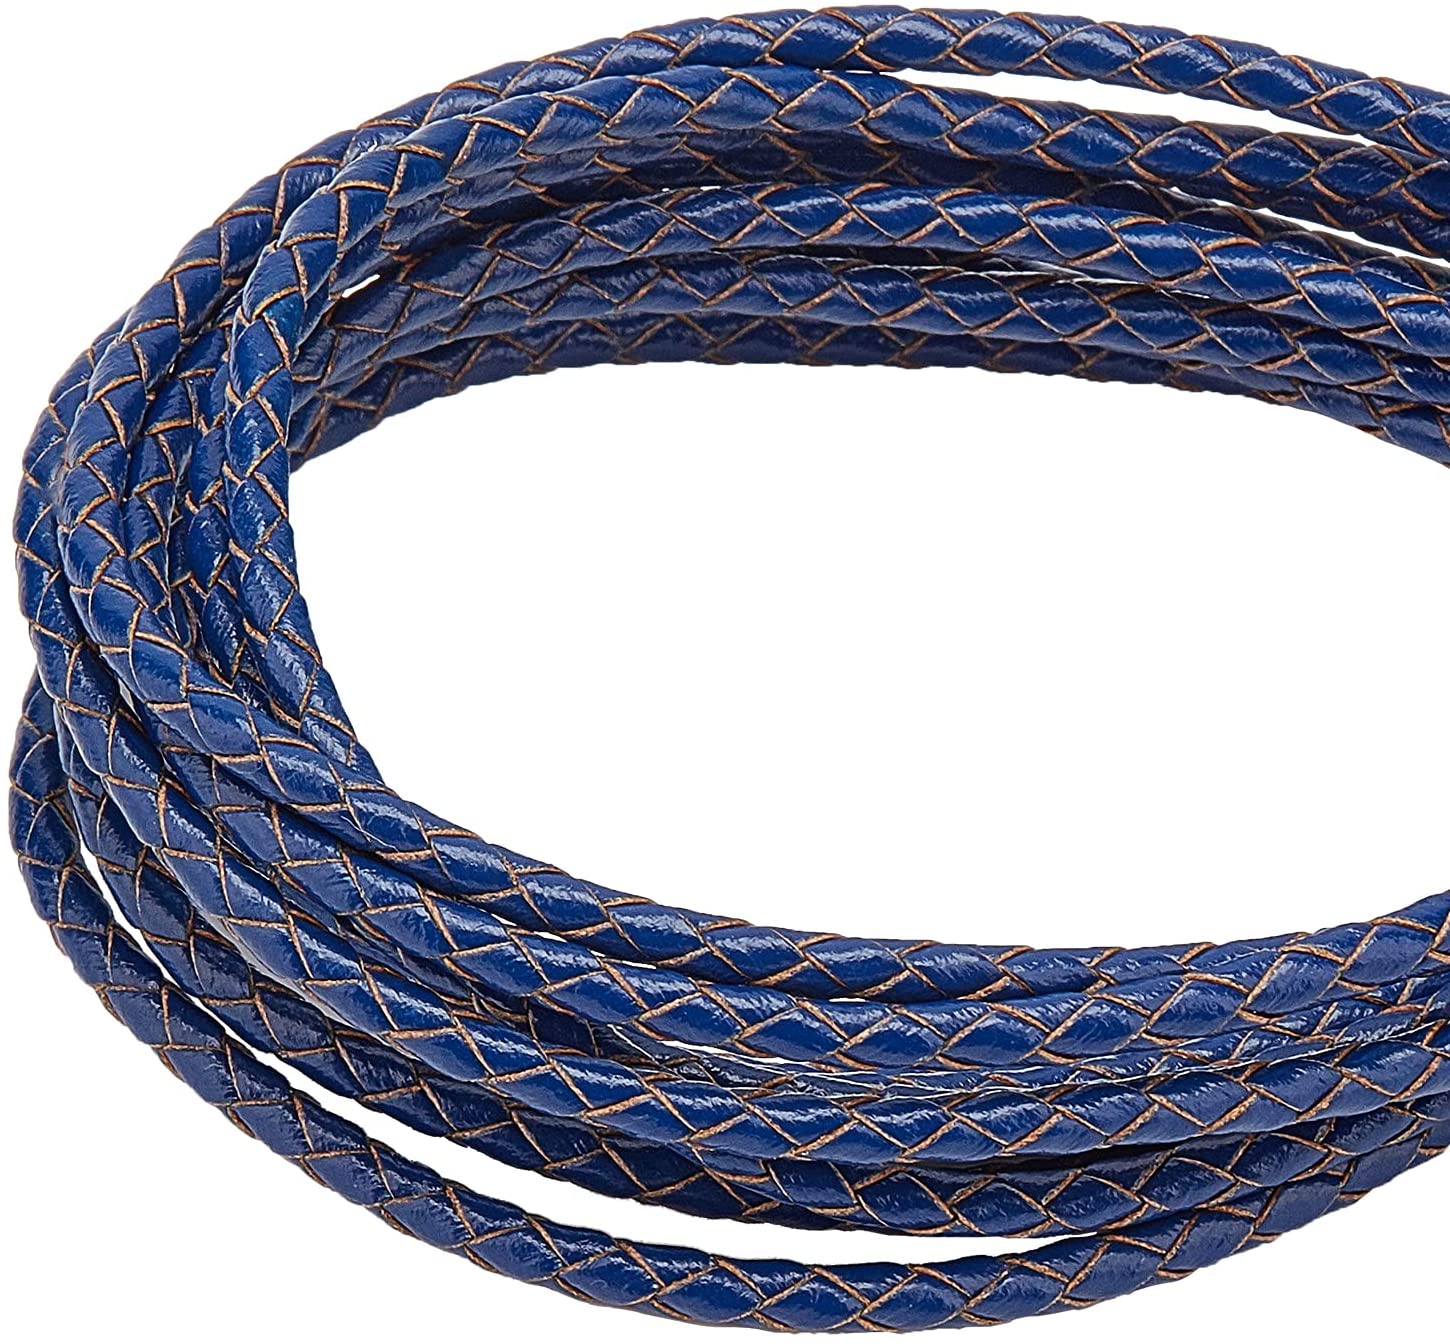 New 5/20 Yards Pure Hand-Woven Braided Leather Cord Make Necklace Bracelet 3mm 